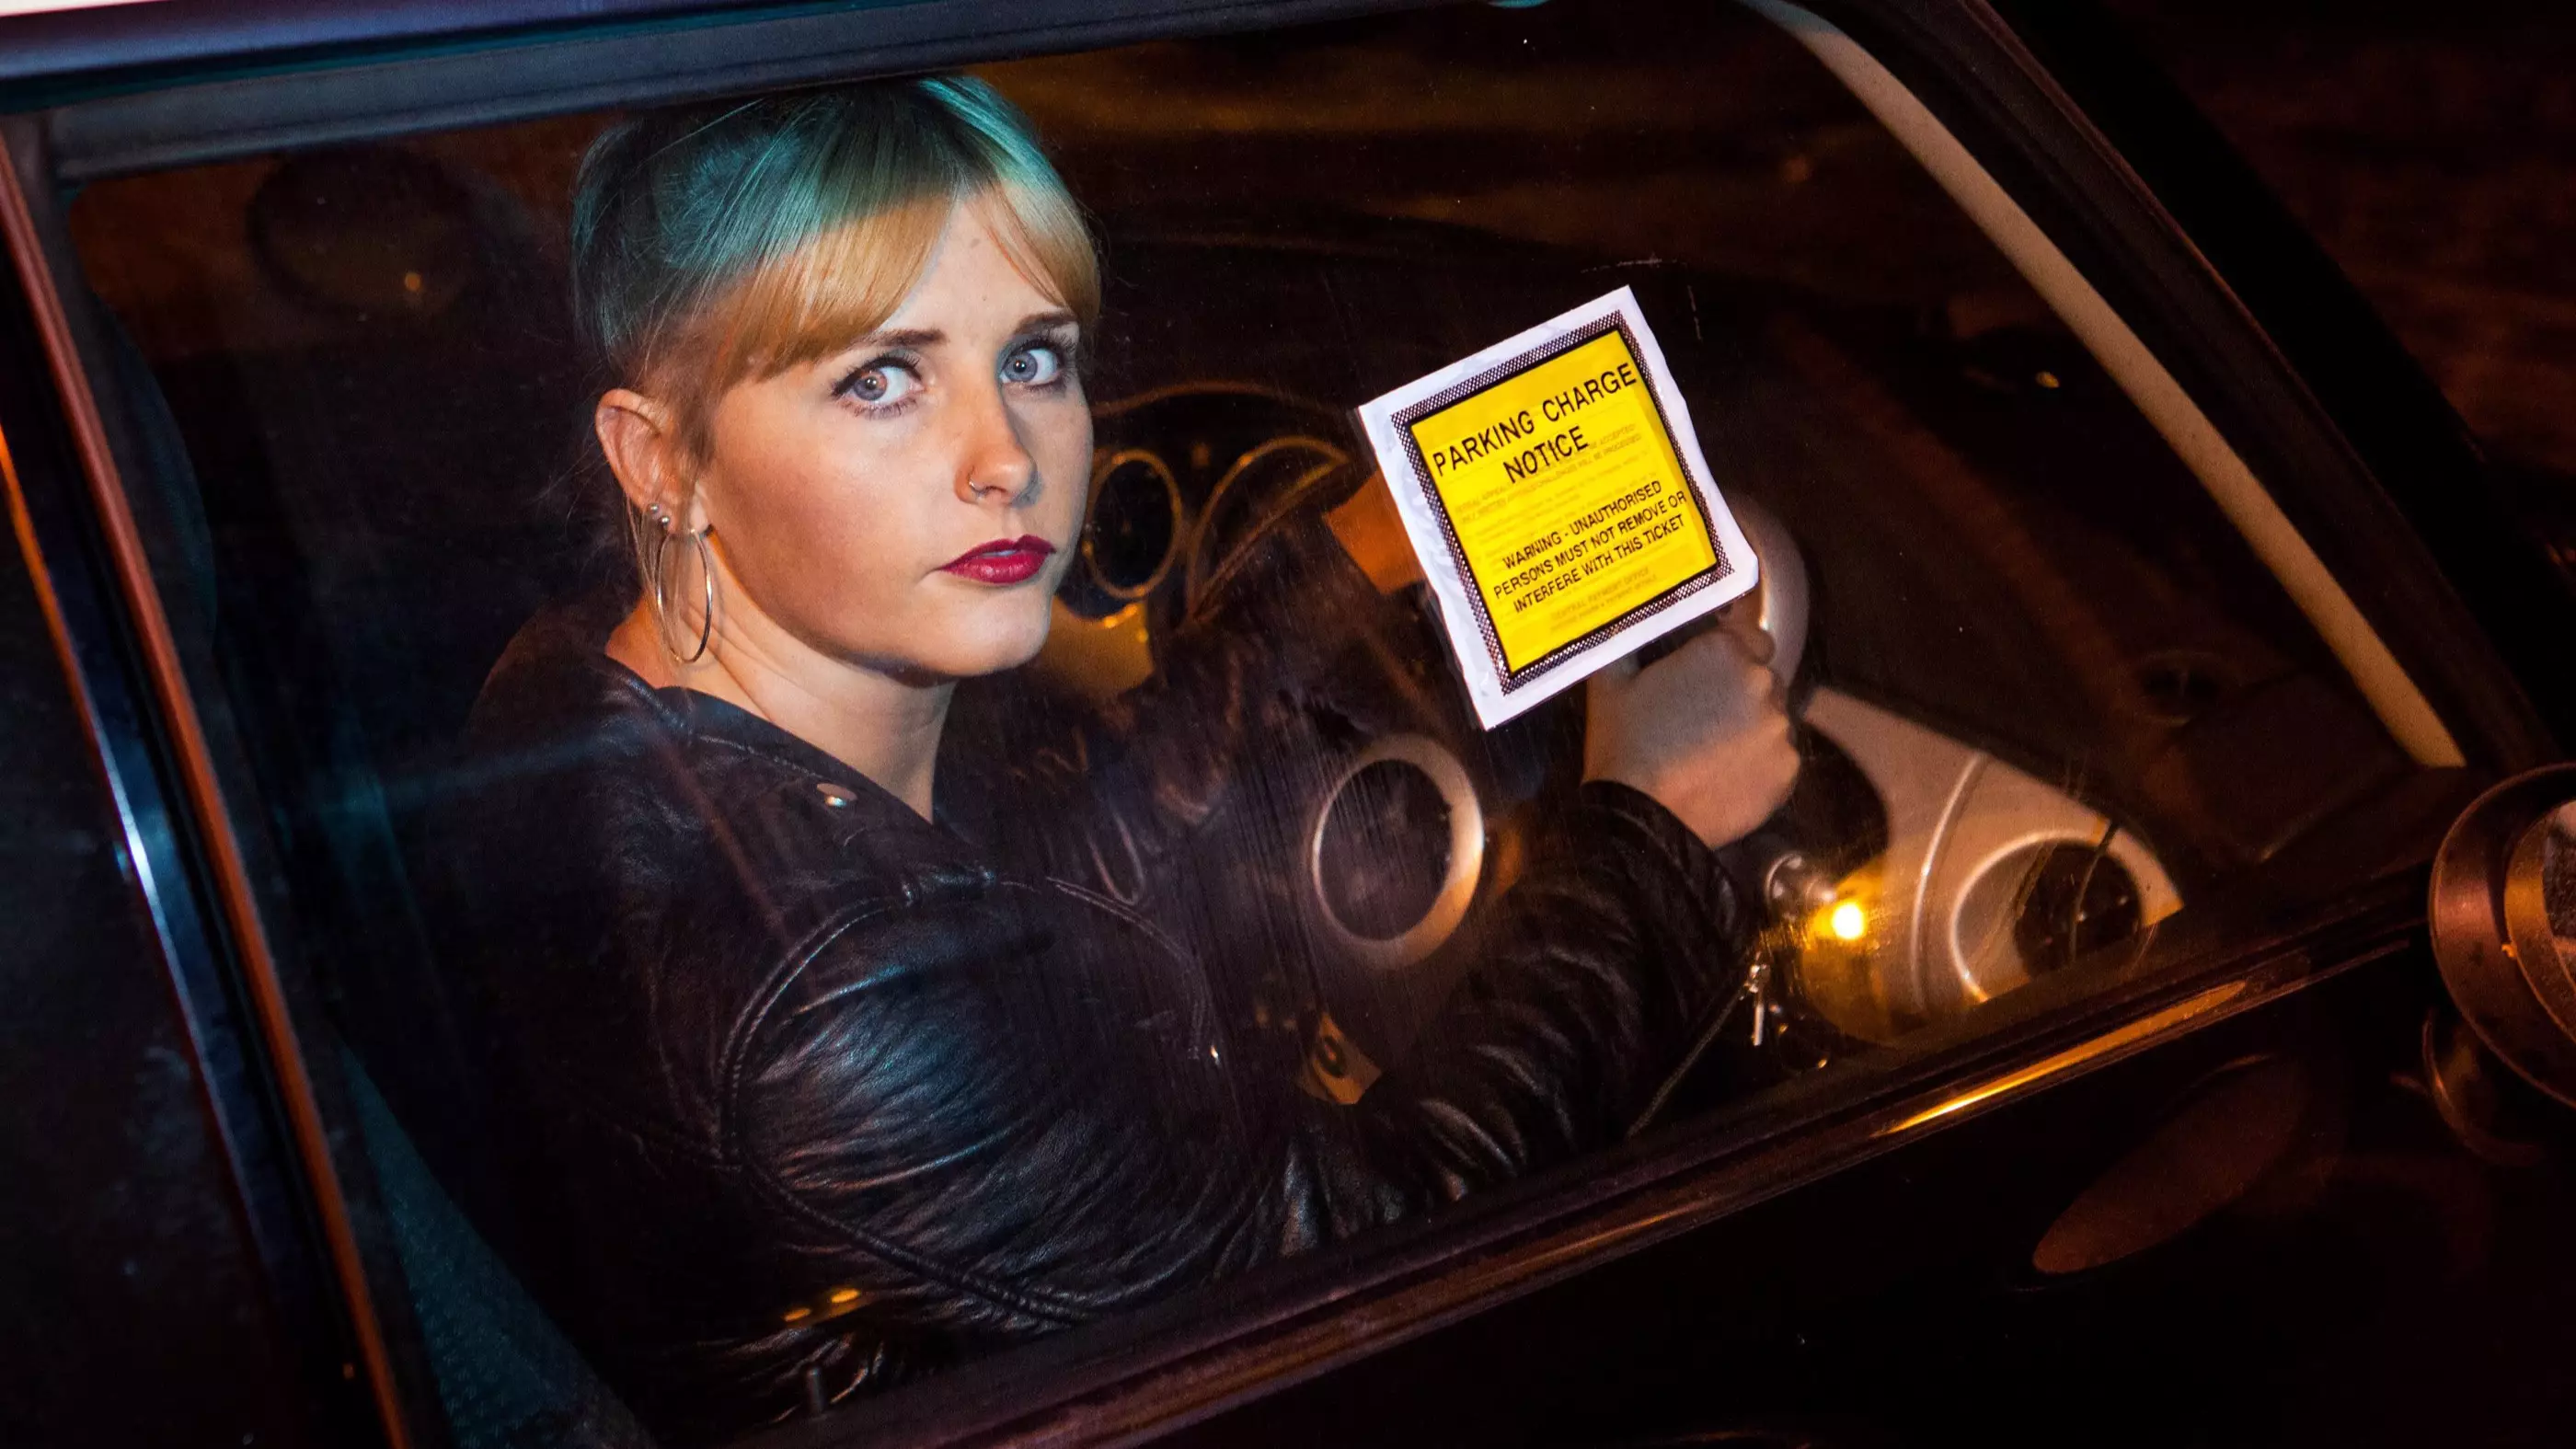 Woman Handed 'Britain's Biggest Parking Fine' After She's Ordered To Pay £24,500